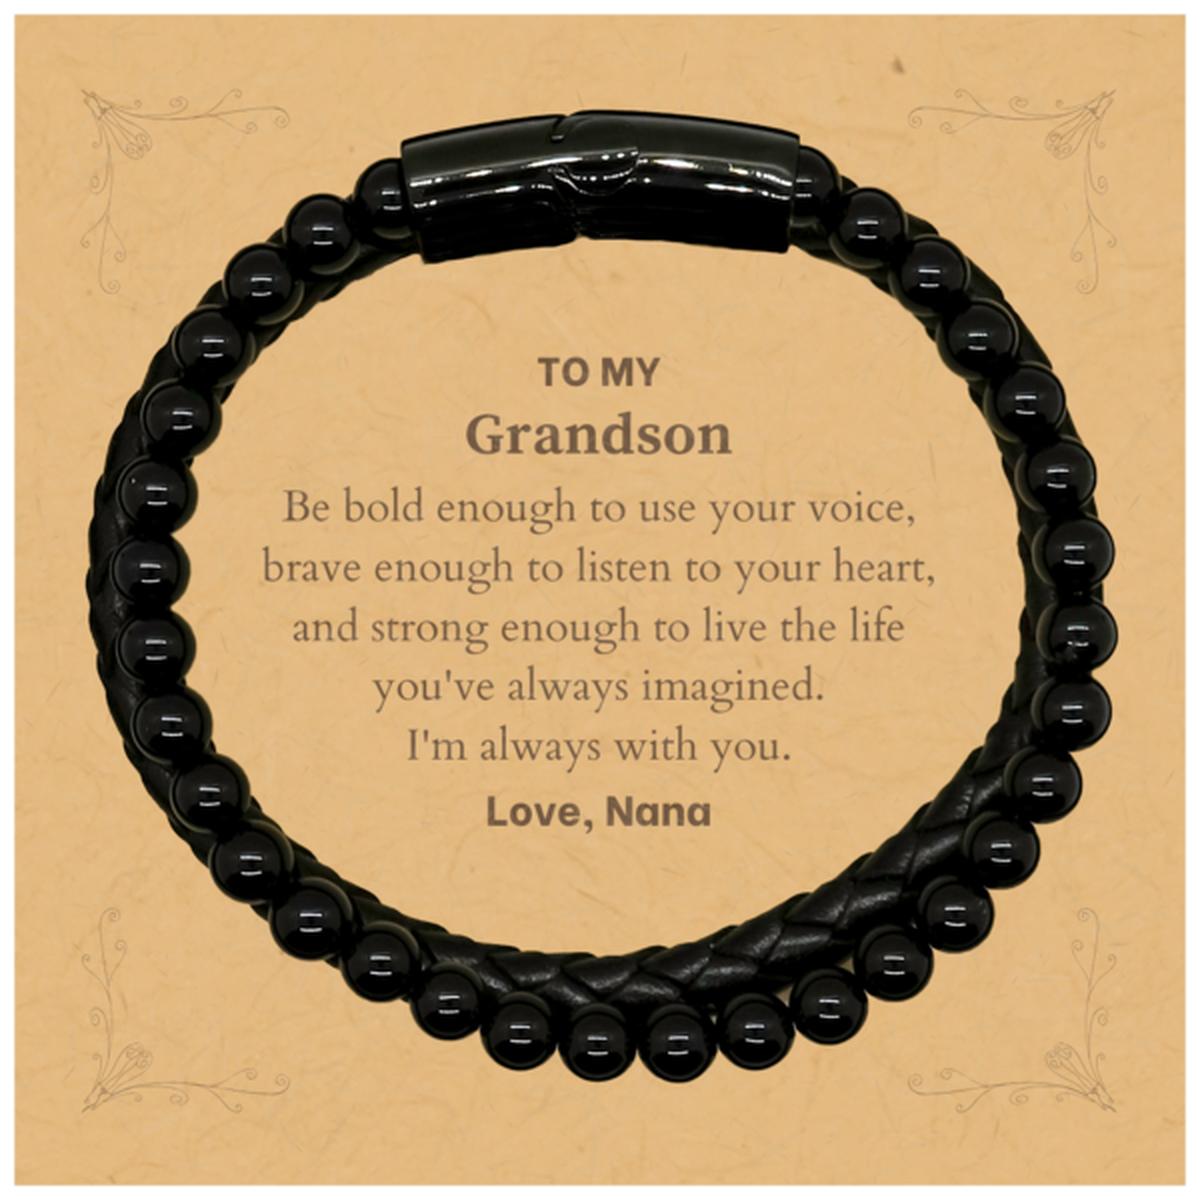 Keepsake Grandson Stone Leather Bracelets Gift Idea Graduation Christmas Birthday Grandson from Nana, Grandson Be bold enough to use your voice, brave enough to listen to your heart. Love, Nana